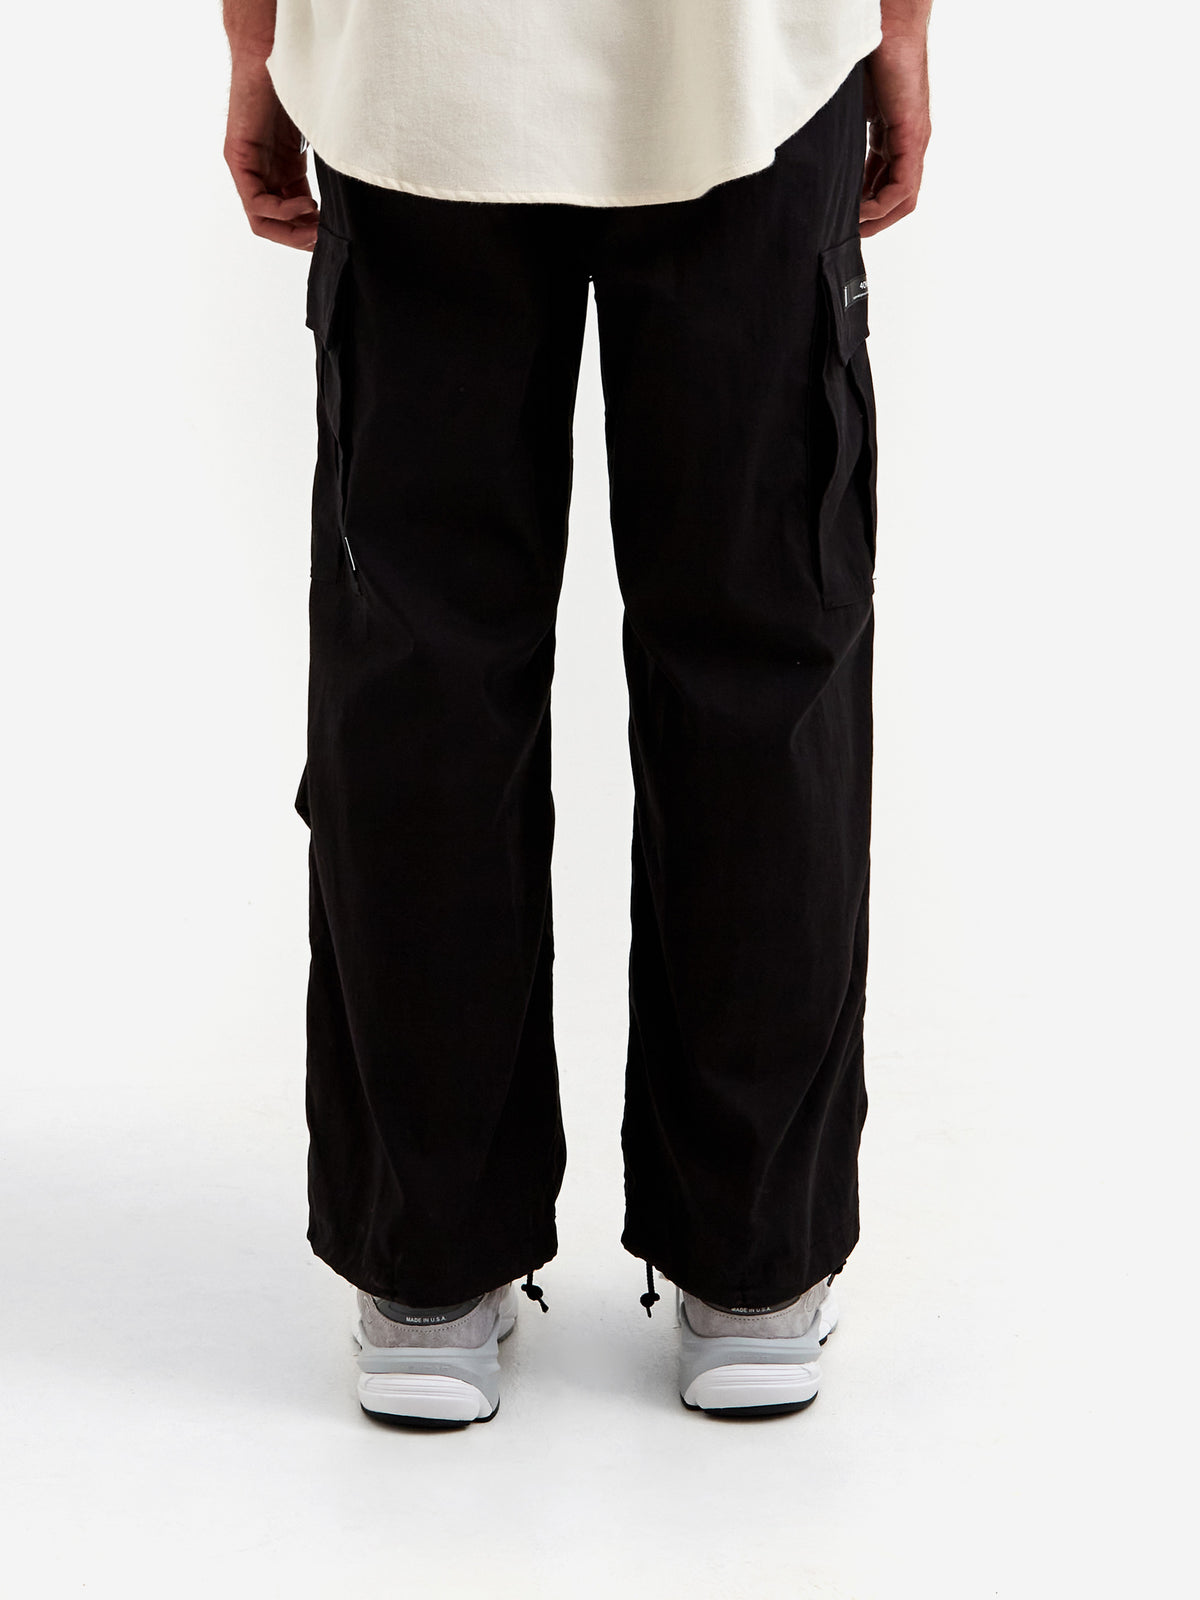 Shop Smarter, Live Better: WTAPS MILT0001 / Trousers 14 / NYCO